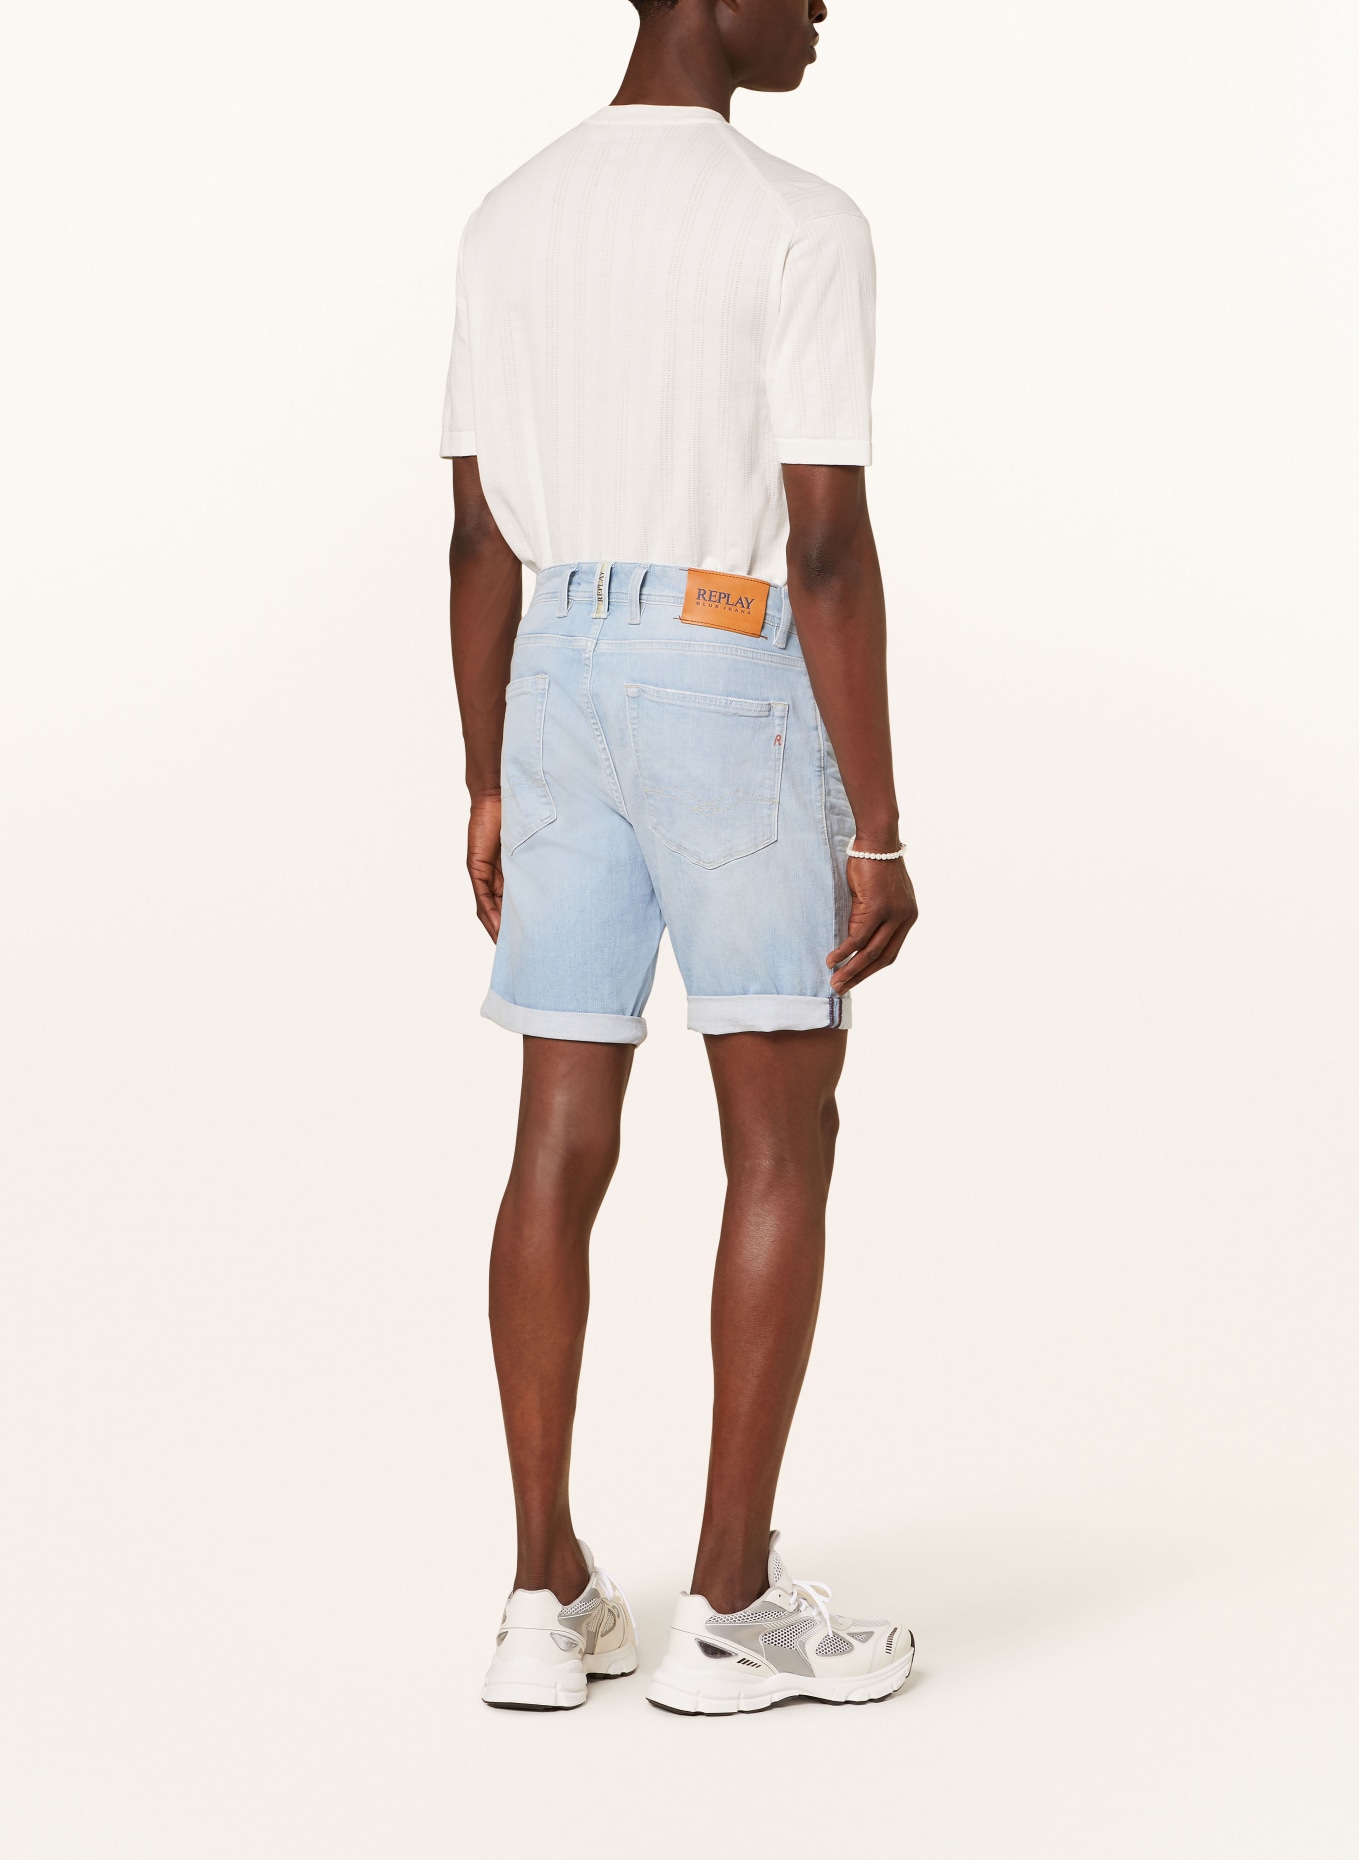 REPLAY Denim shorts 573 tapered fit, Color: 010 LIGHT BLUE (Image 3)